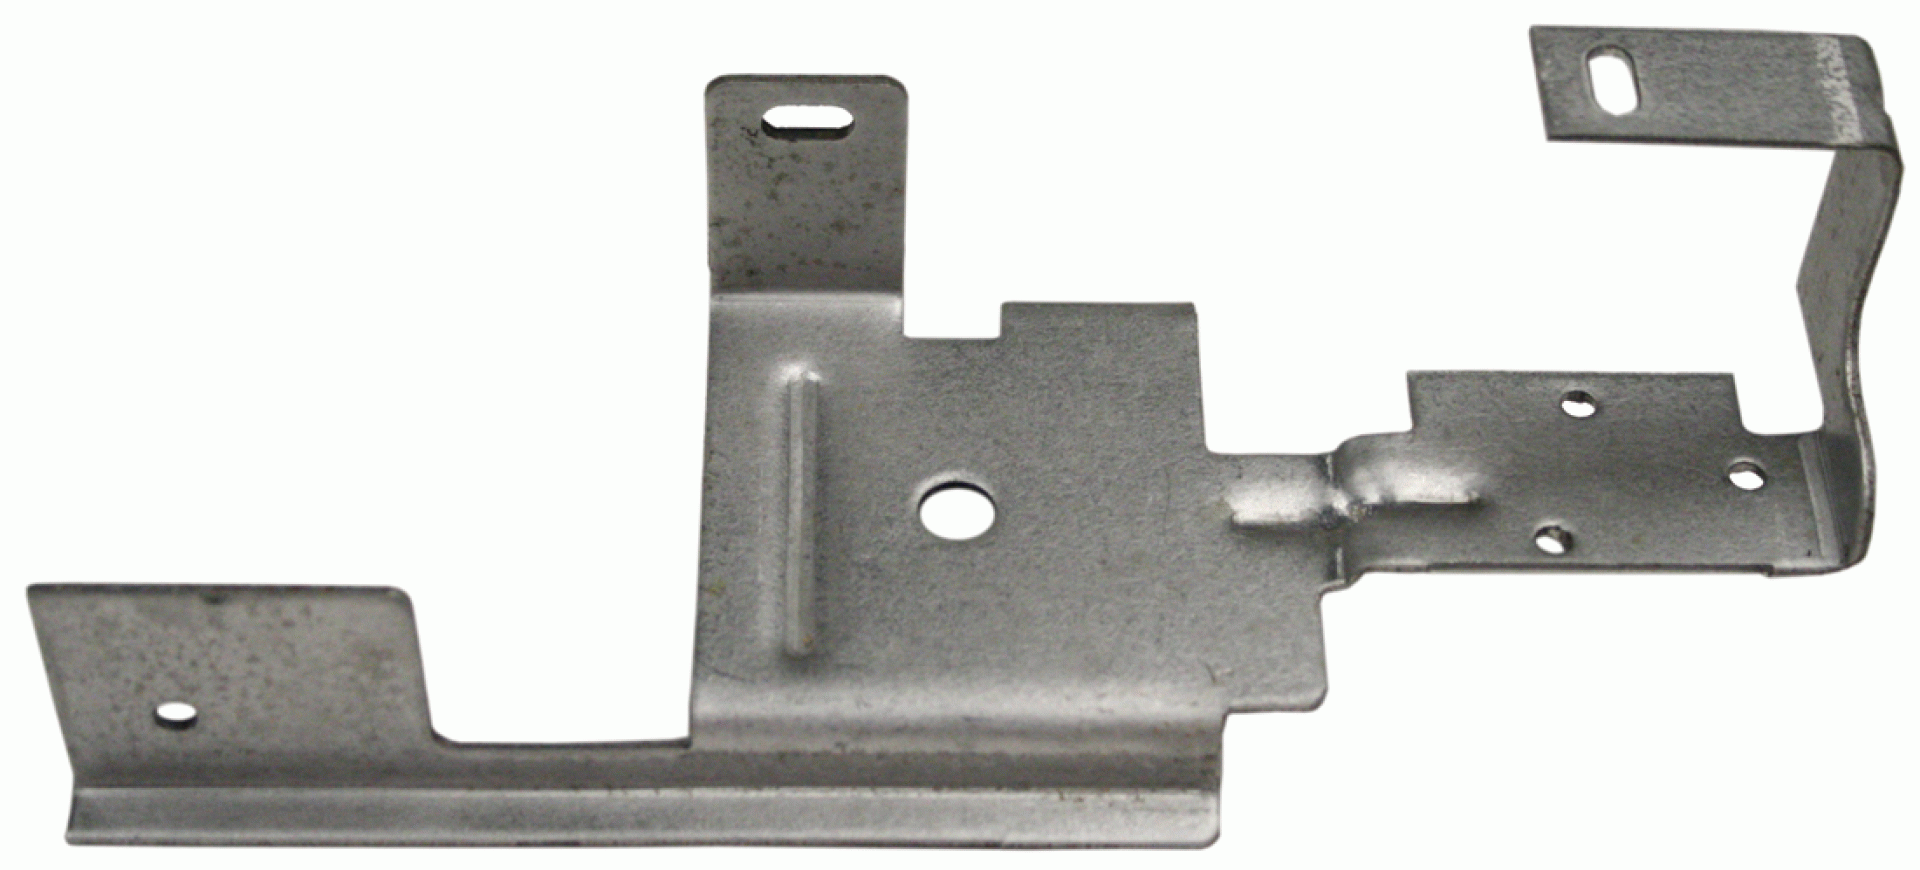 ATWOOD MOBILE PRODUCTS LLC | 94787 | GAS VALVE BRACKET - ONE PIECE